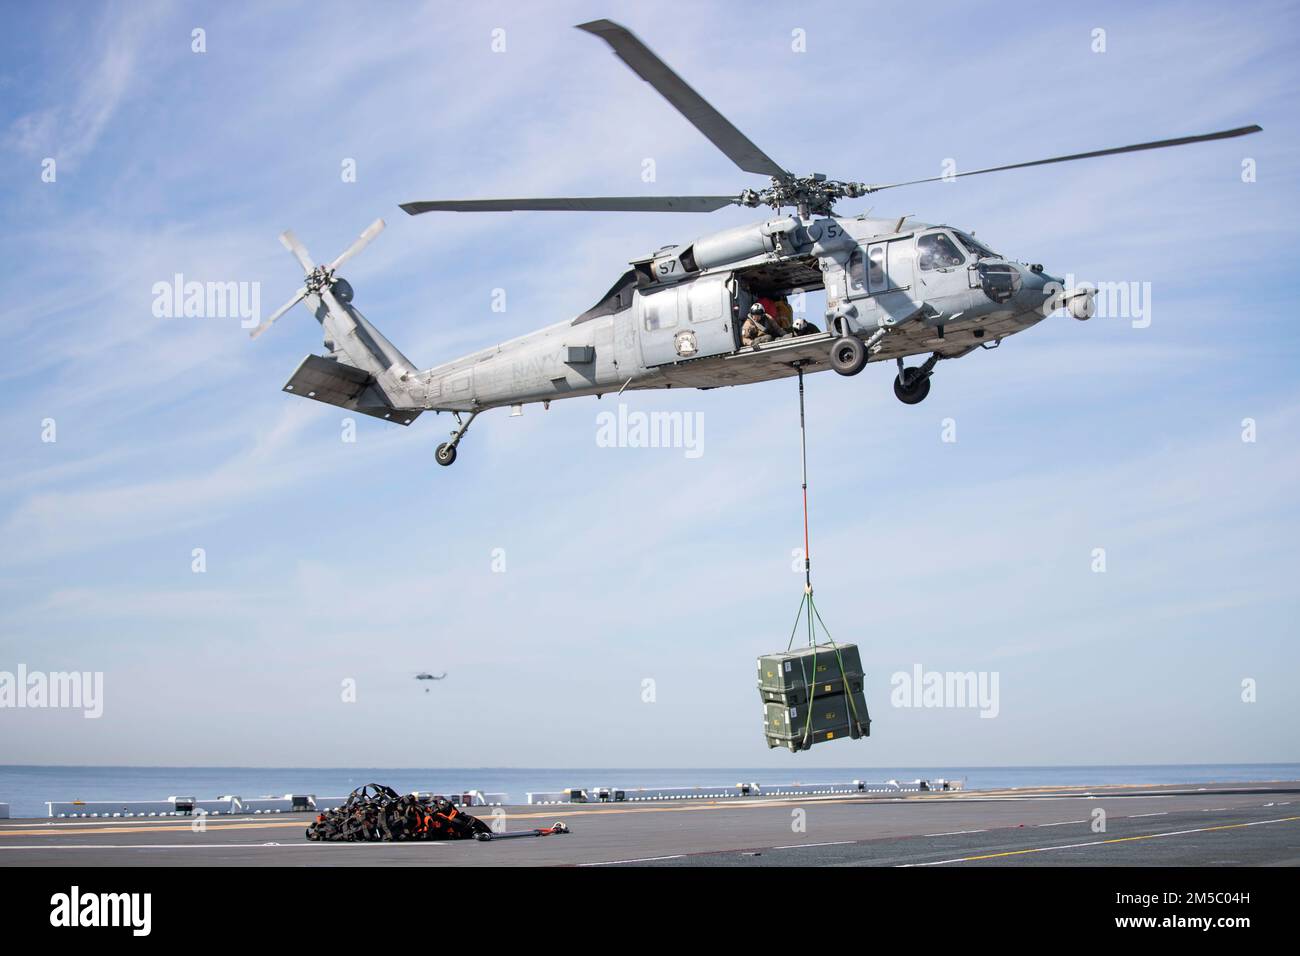 220225-N-CZ759-1137 PACIFIC OCEAN (Feb. 25, 2022) – An MH-60S Sea Hawk helicopter assigned to Helicopter Sea Combat Squadron (HSC) 23 delivers a pallet of ammunition to amphibious assault ship USS Tripoli’s (LHA 7) flight deck, Feb. 25. Tripoli is underway conducting routine operations in U.S. 3rd Fleet. Stock Photo